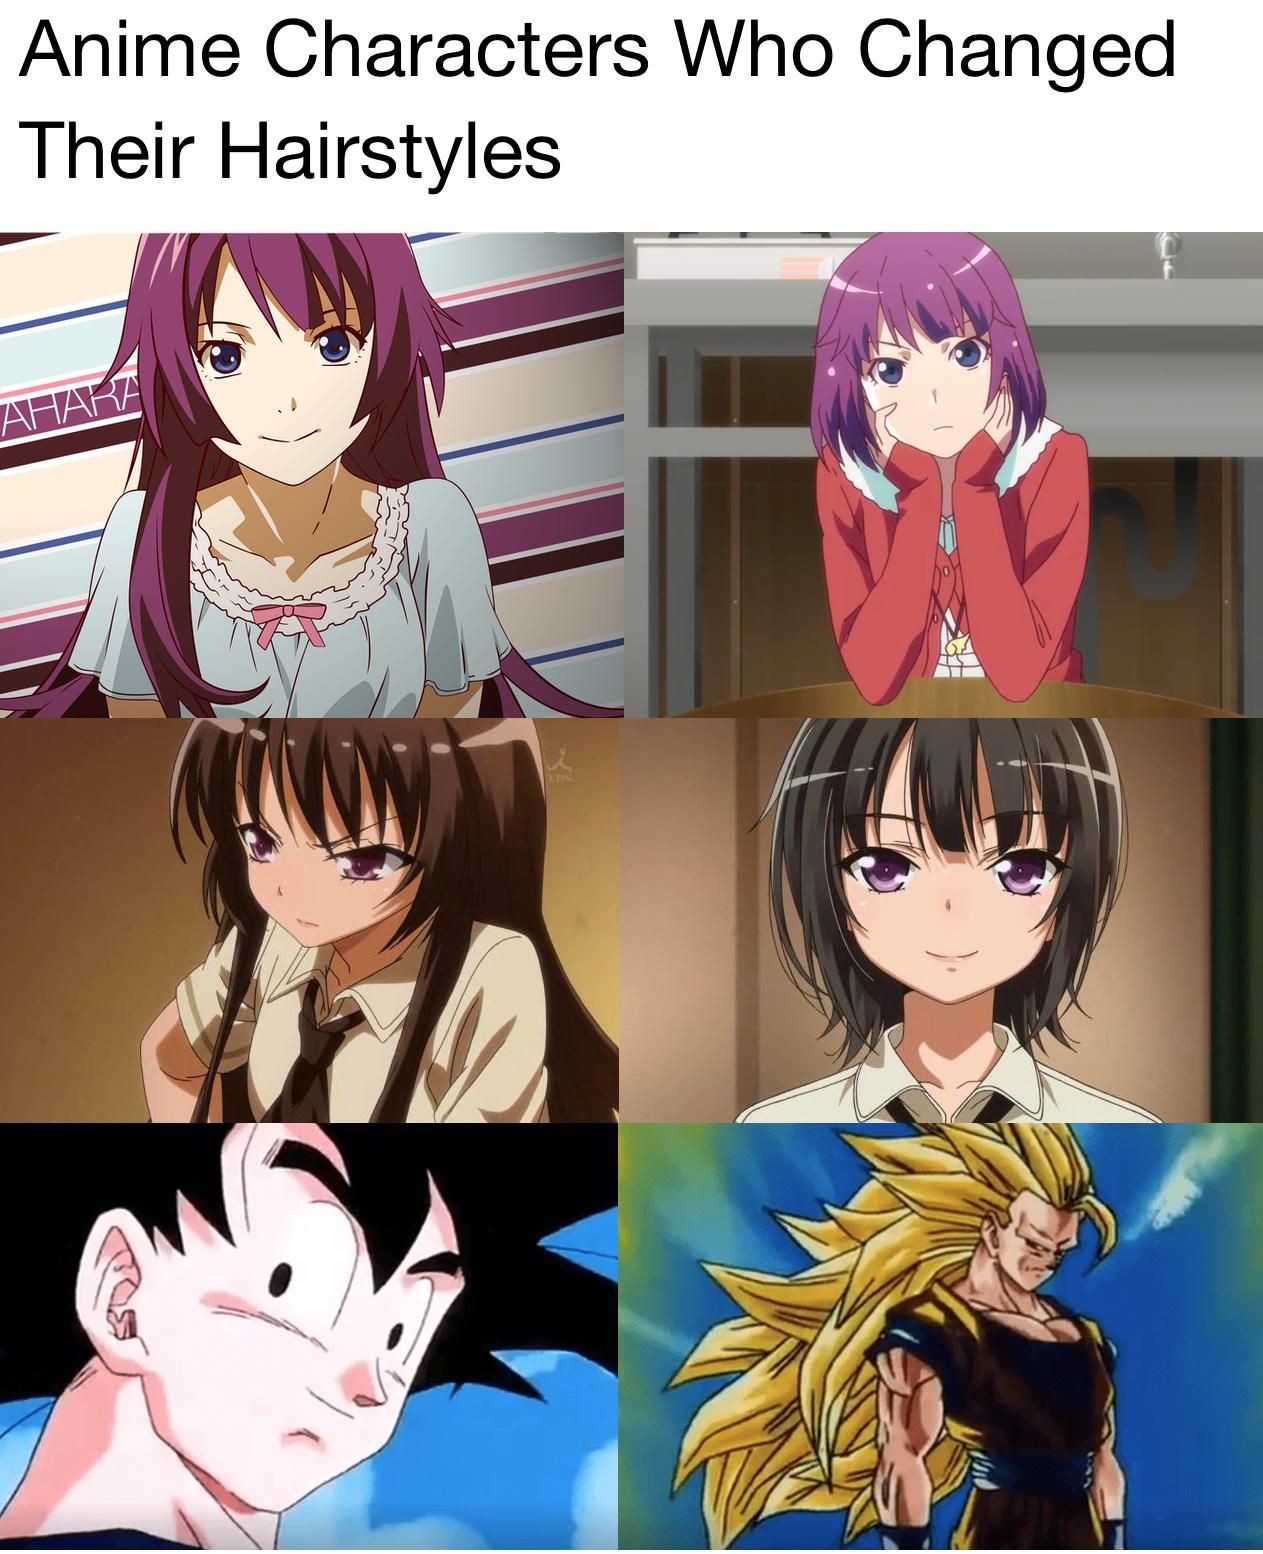 Anime characters who changed their hairsyles